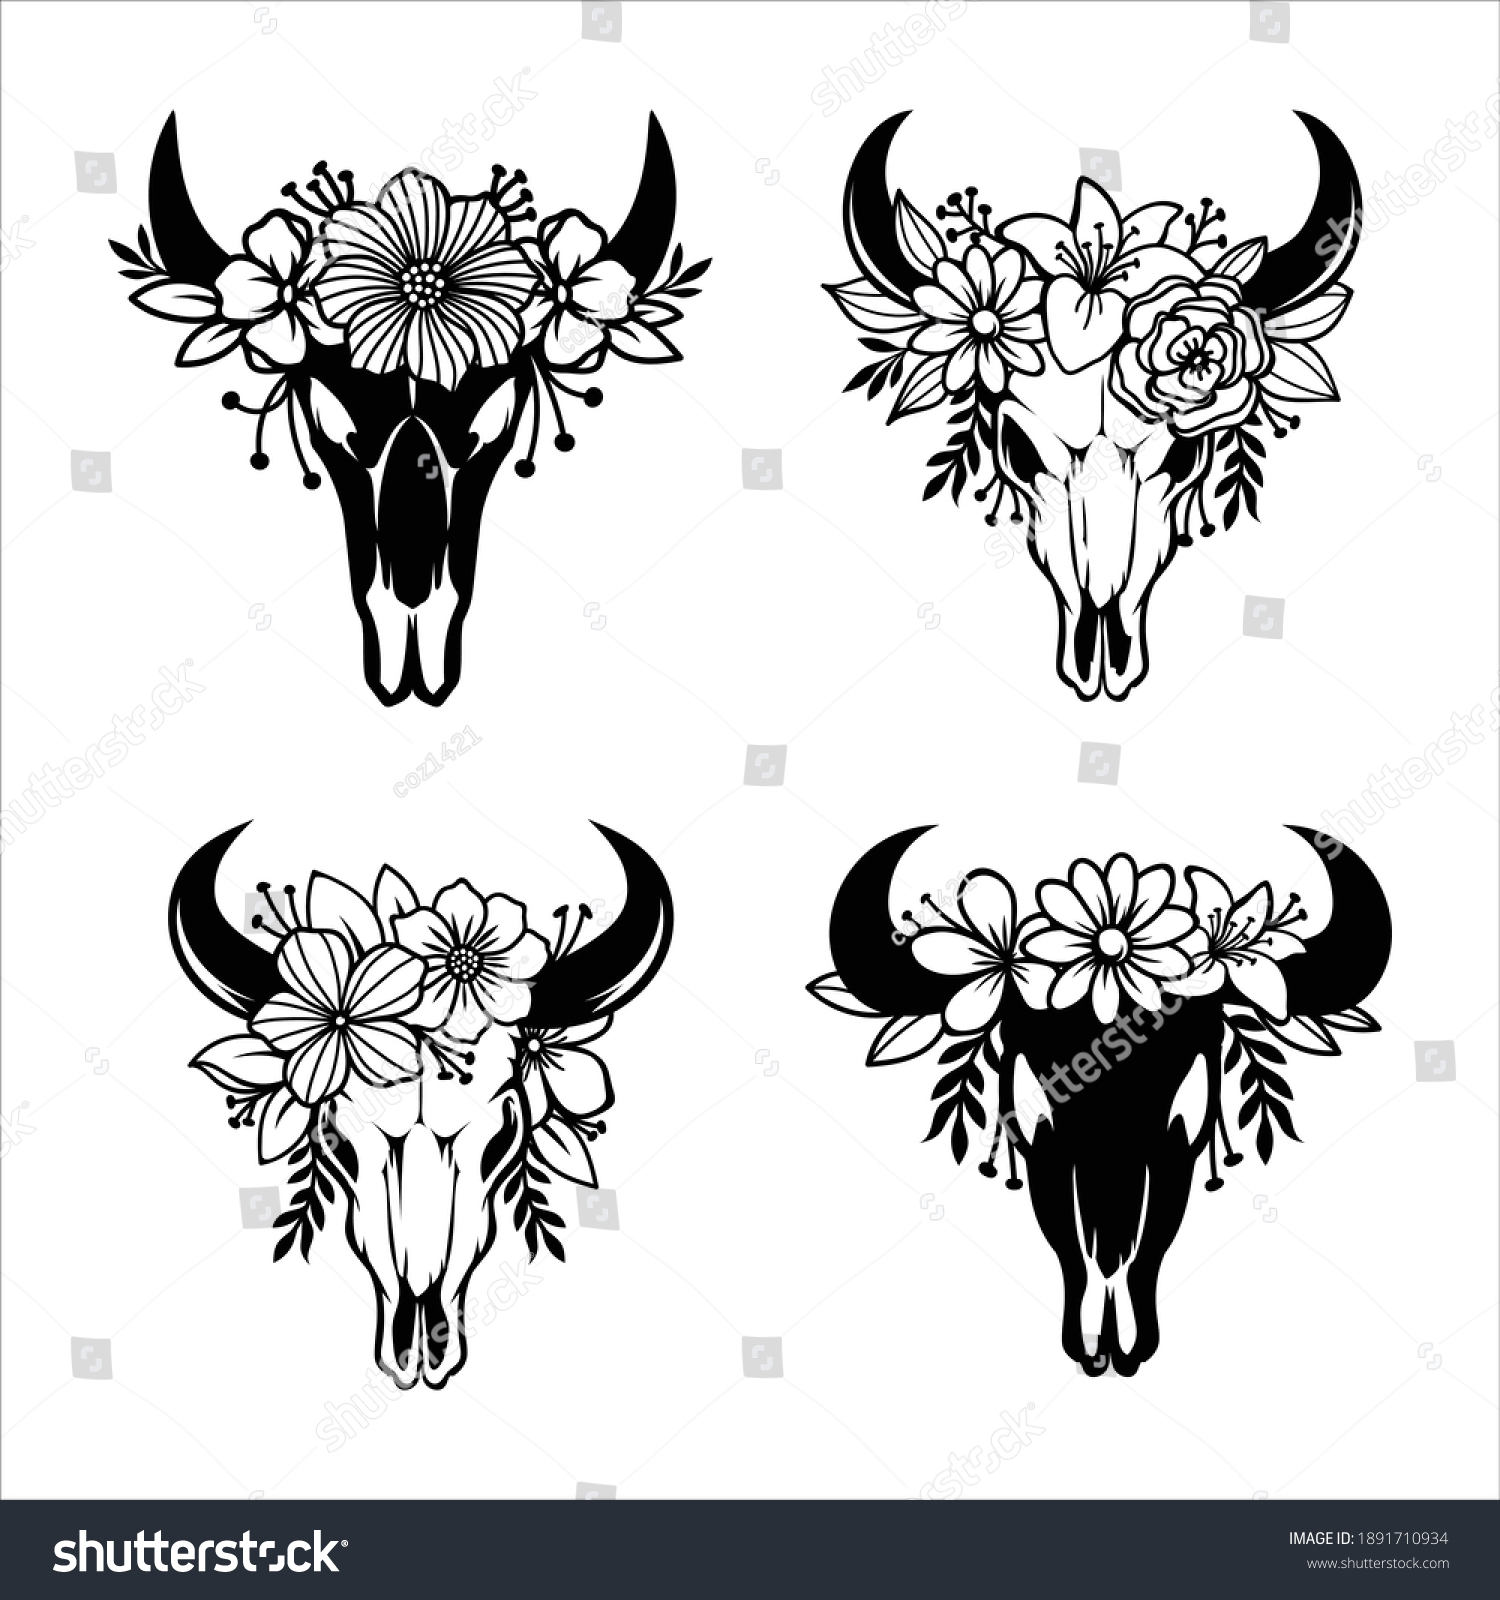 SVG of Skull of a cow with horns decorated with flowers svg